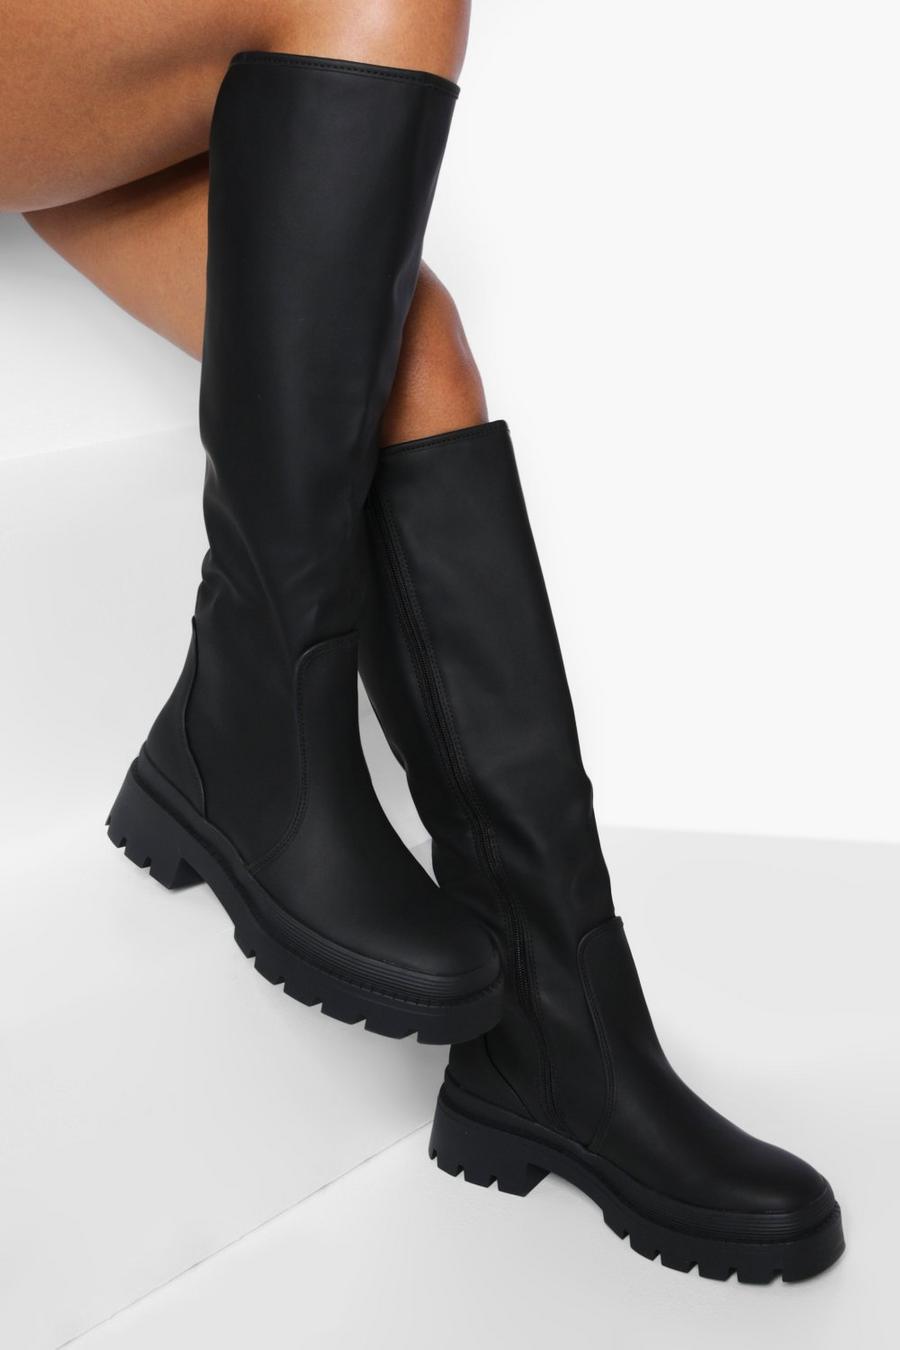 Black Rubber Knee High Boots